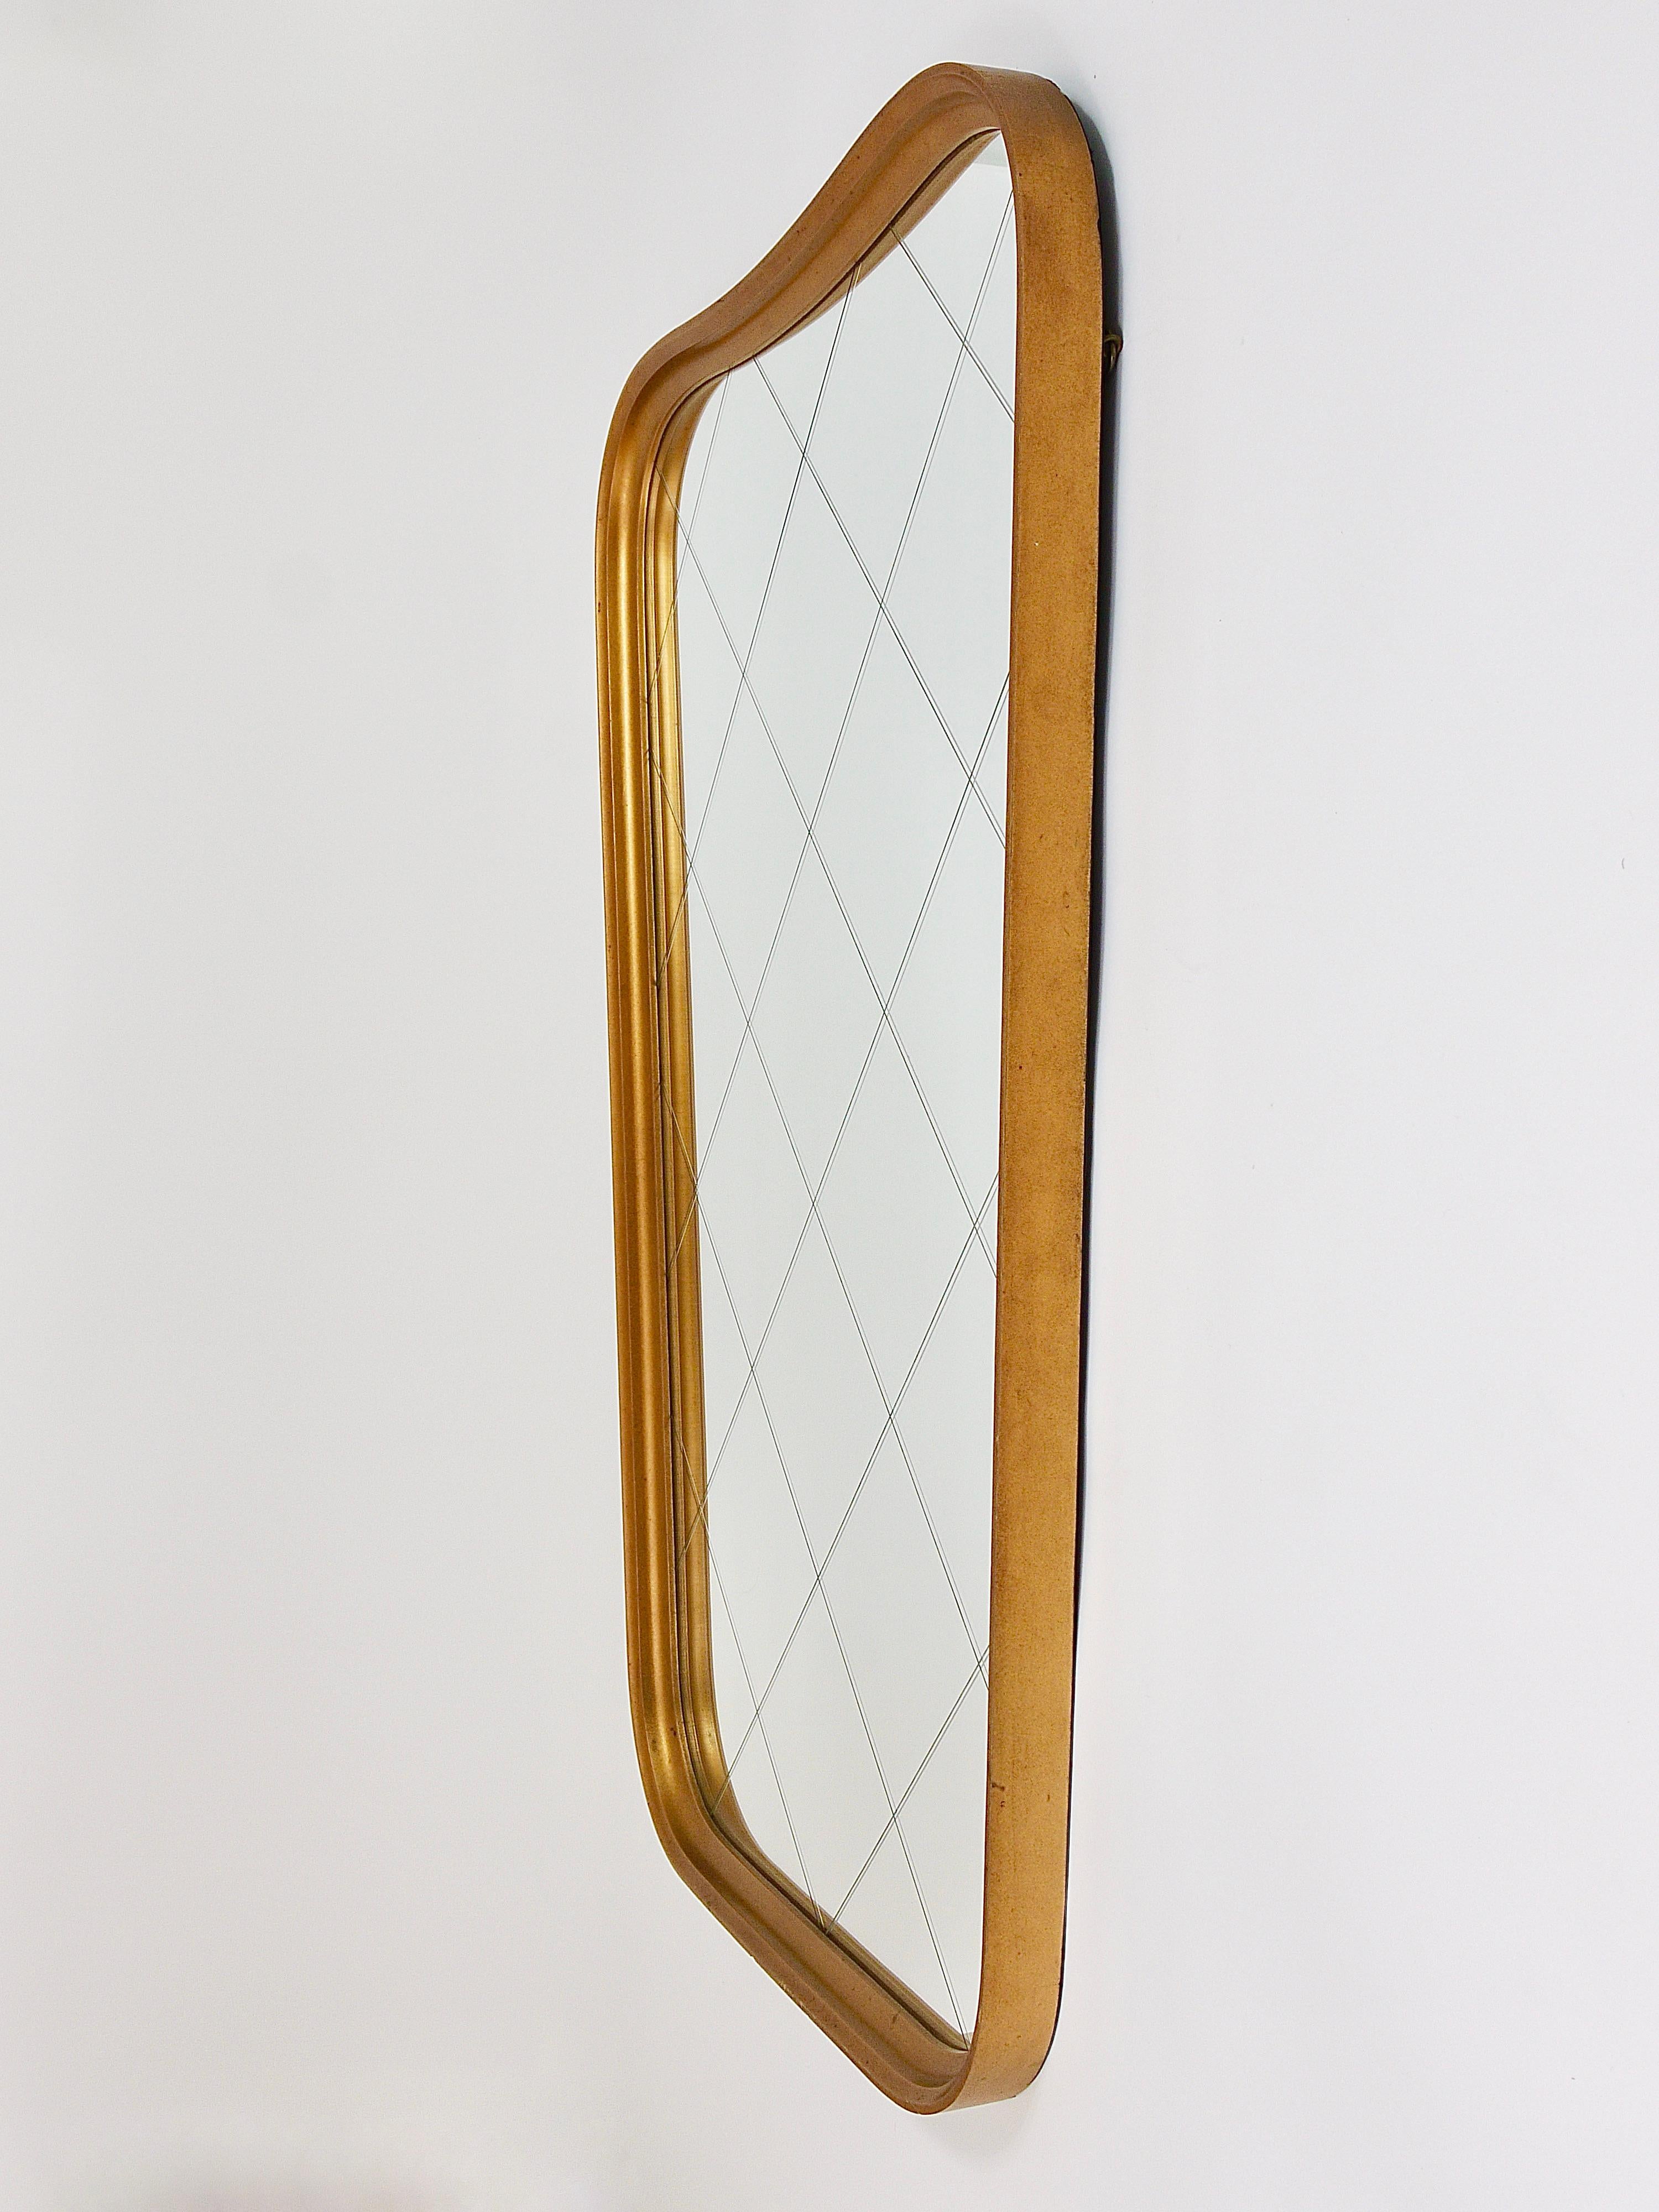 A charming Austrian modernist wall mirror with a golden bent wood frame and a nice checked decor pattern on the mirror glass. From the 1950s. This beautiful mirror has a lovely classical shape and is in very good condition with marginal patina on